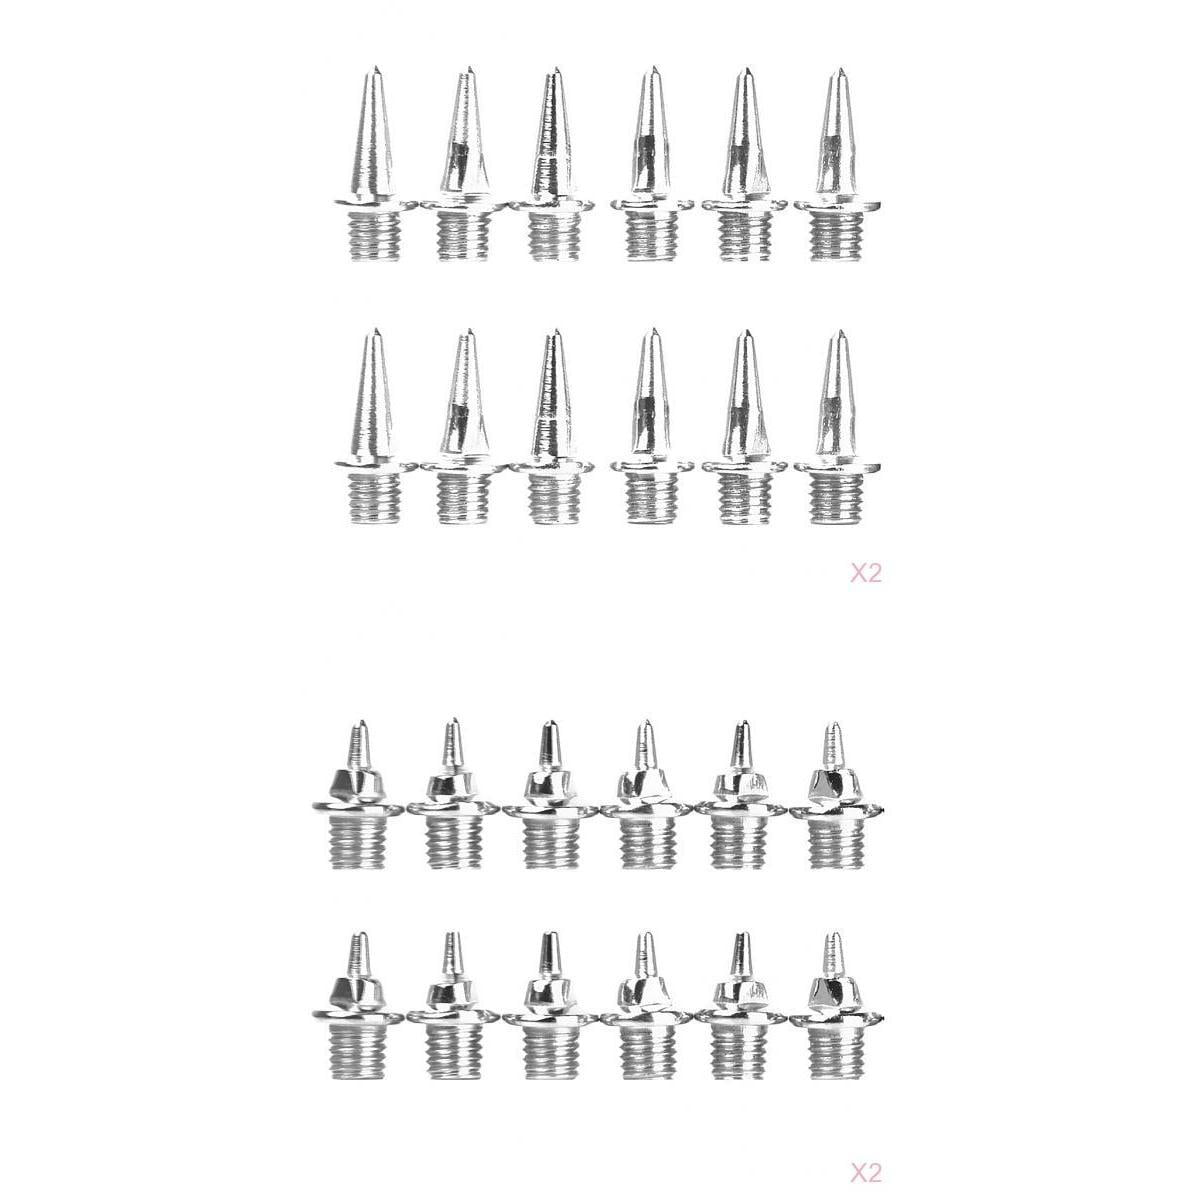 Details about   48Pcs Unisex Runnning Track & Field Metal Steel Spikes Cricket Athletes Stud 